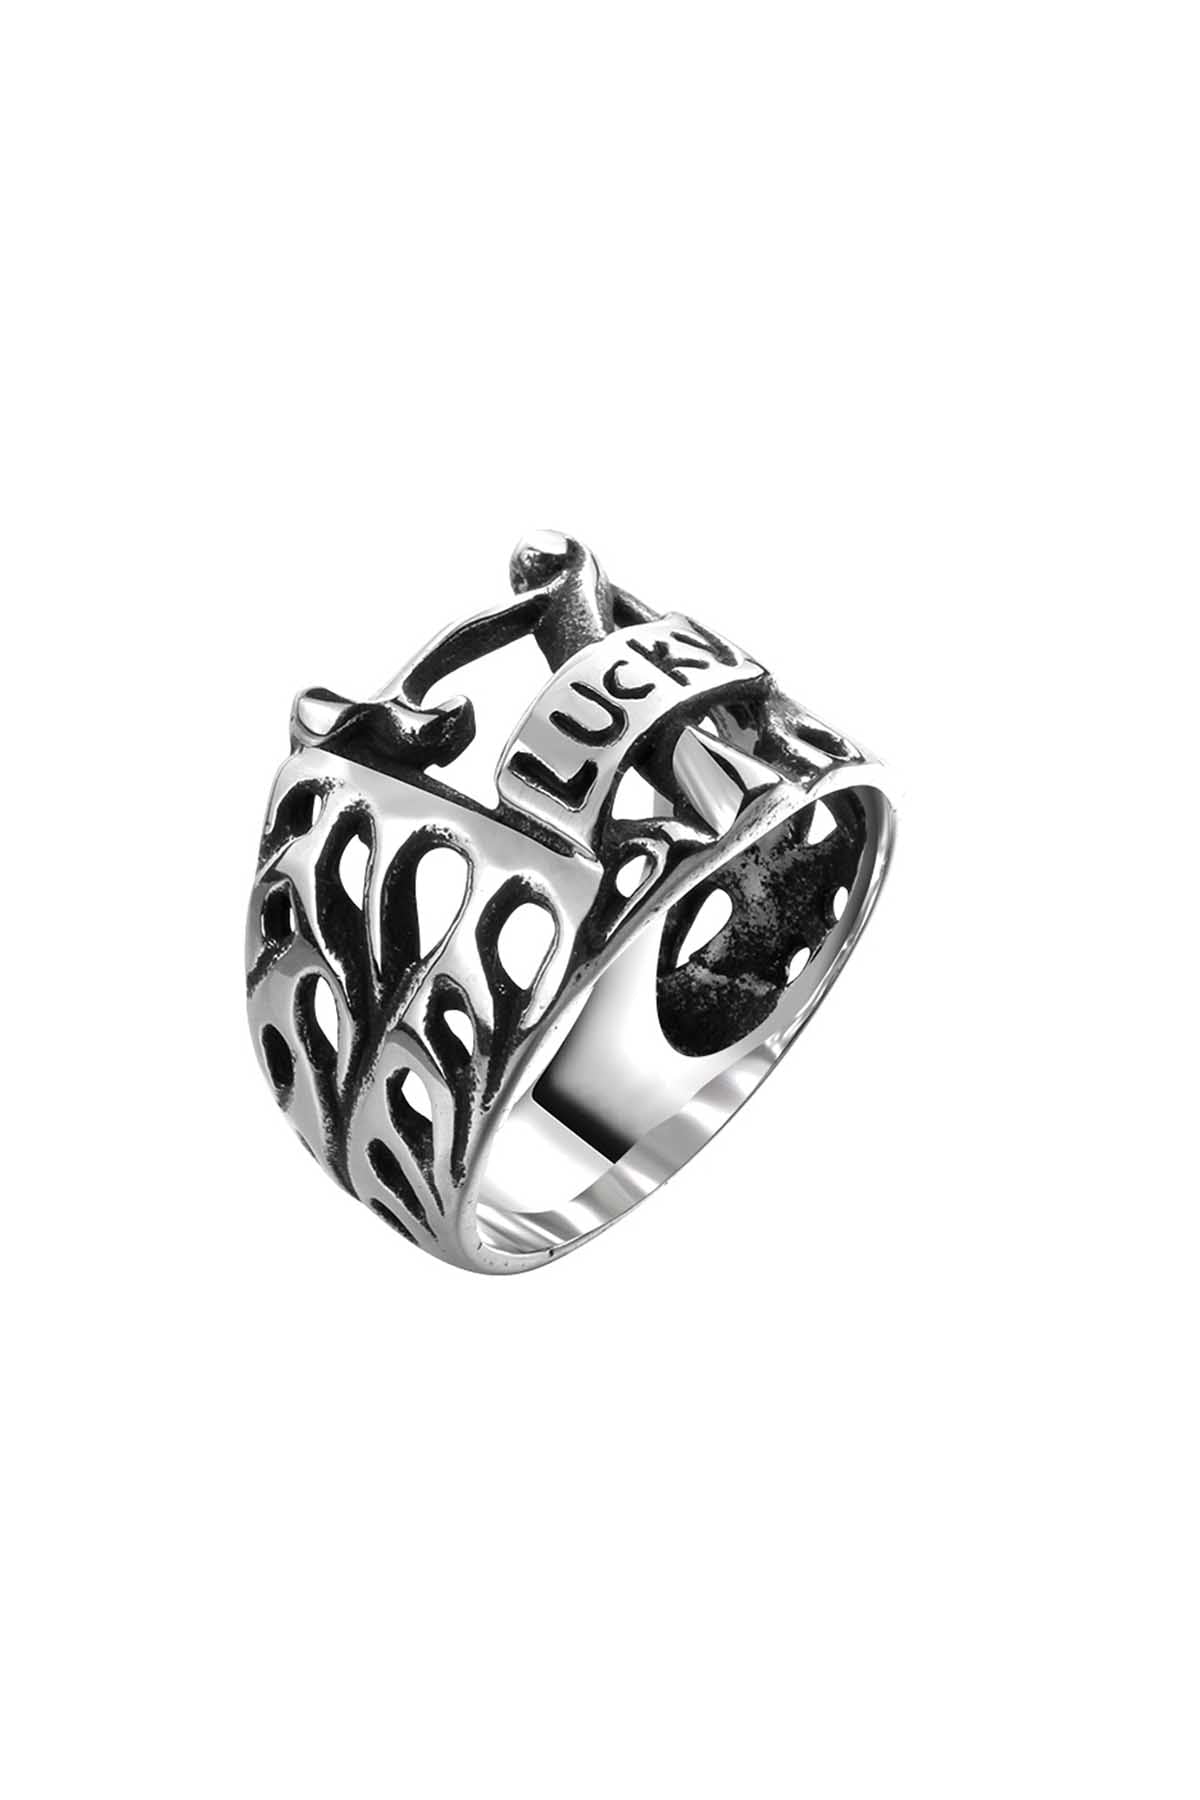 Gomaya Vintage Lucky 7 Stainless Steel Ring